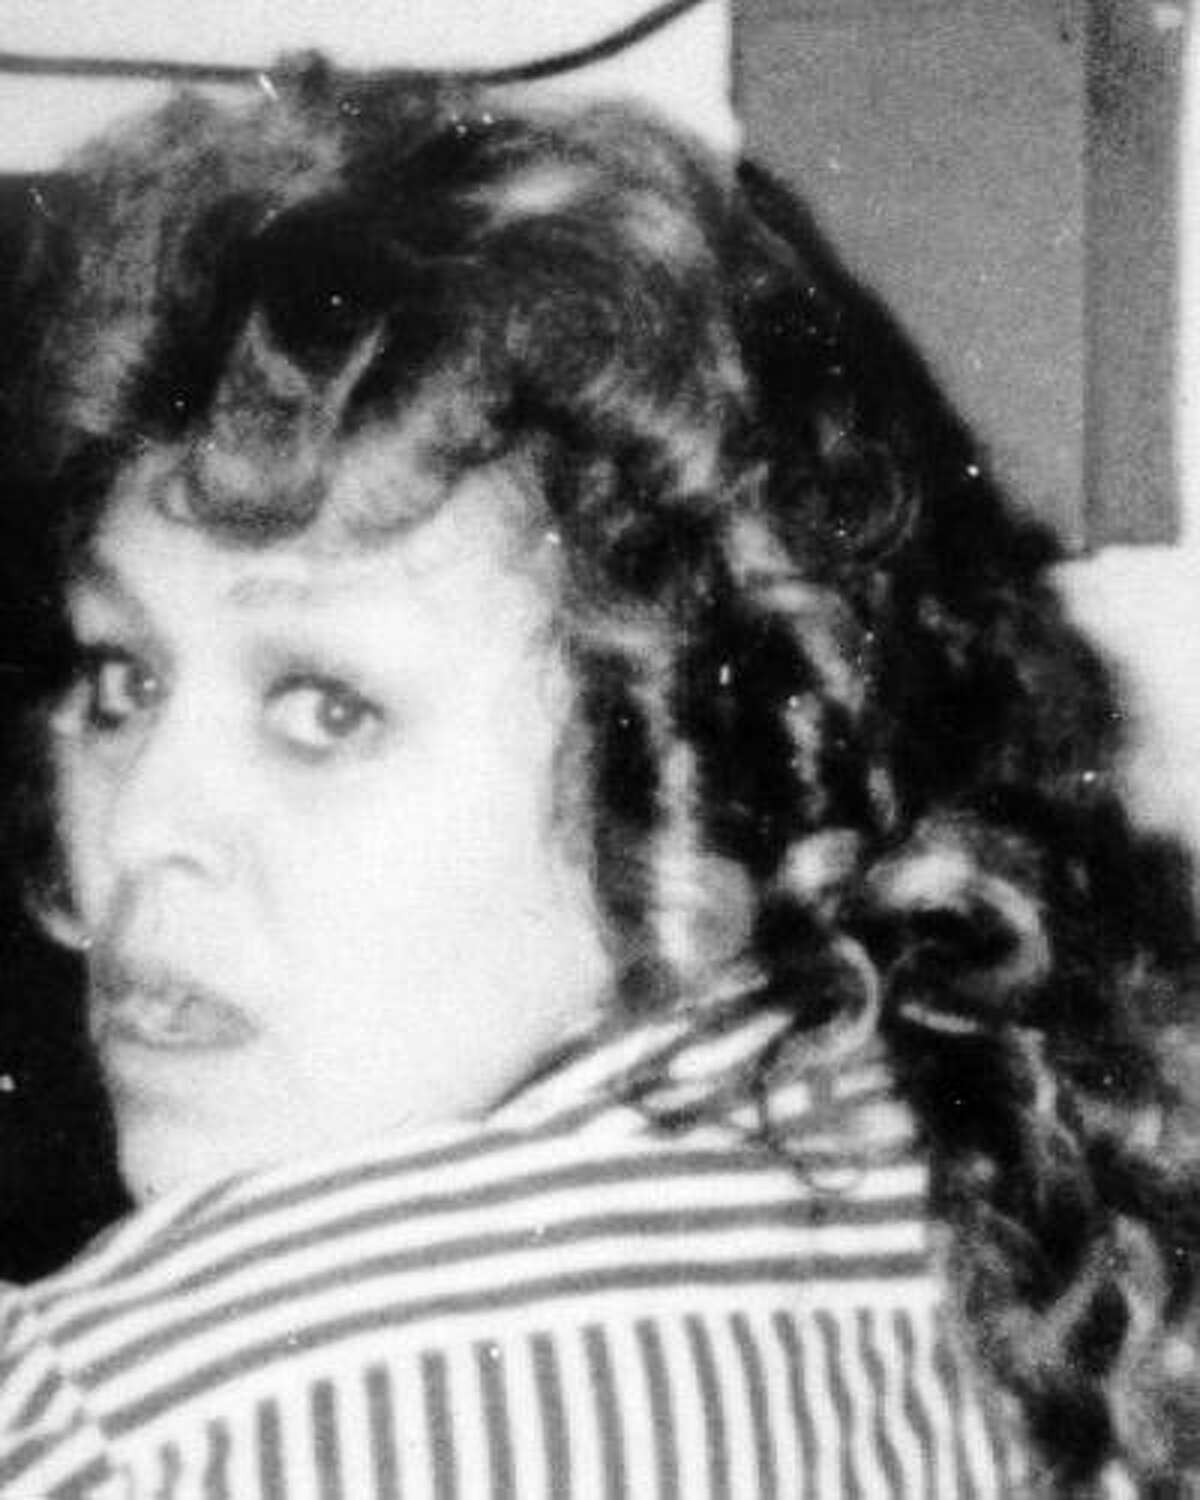 Juanita Elanor Bardin, AKA Juanita Eleanor Bardin, was last seen in Vidor in 1993 at the age of 49. She was known to travel across Texas with the Gene Hammond Carnival. She has a black widow spider tattoo on her chest and the name 'Ray' tattooed on her left arm.